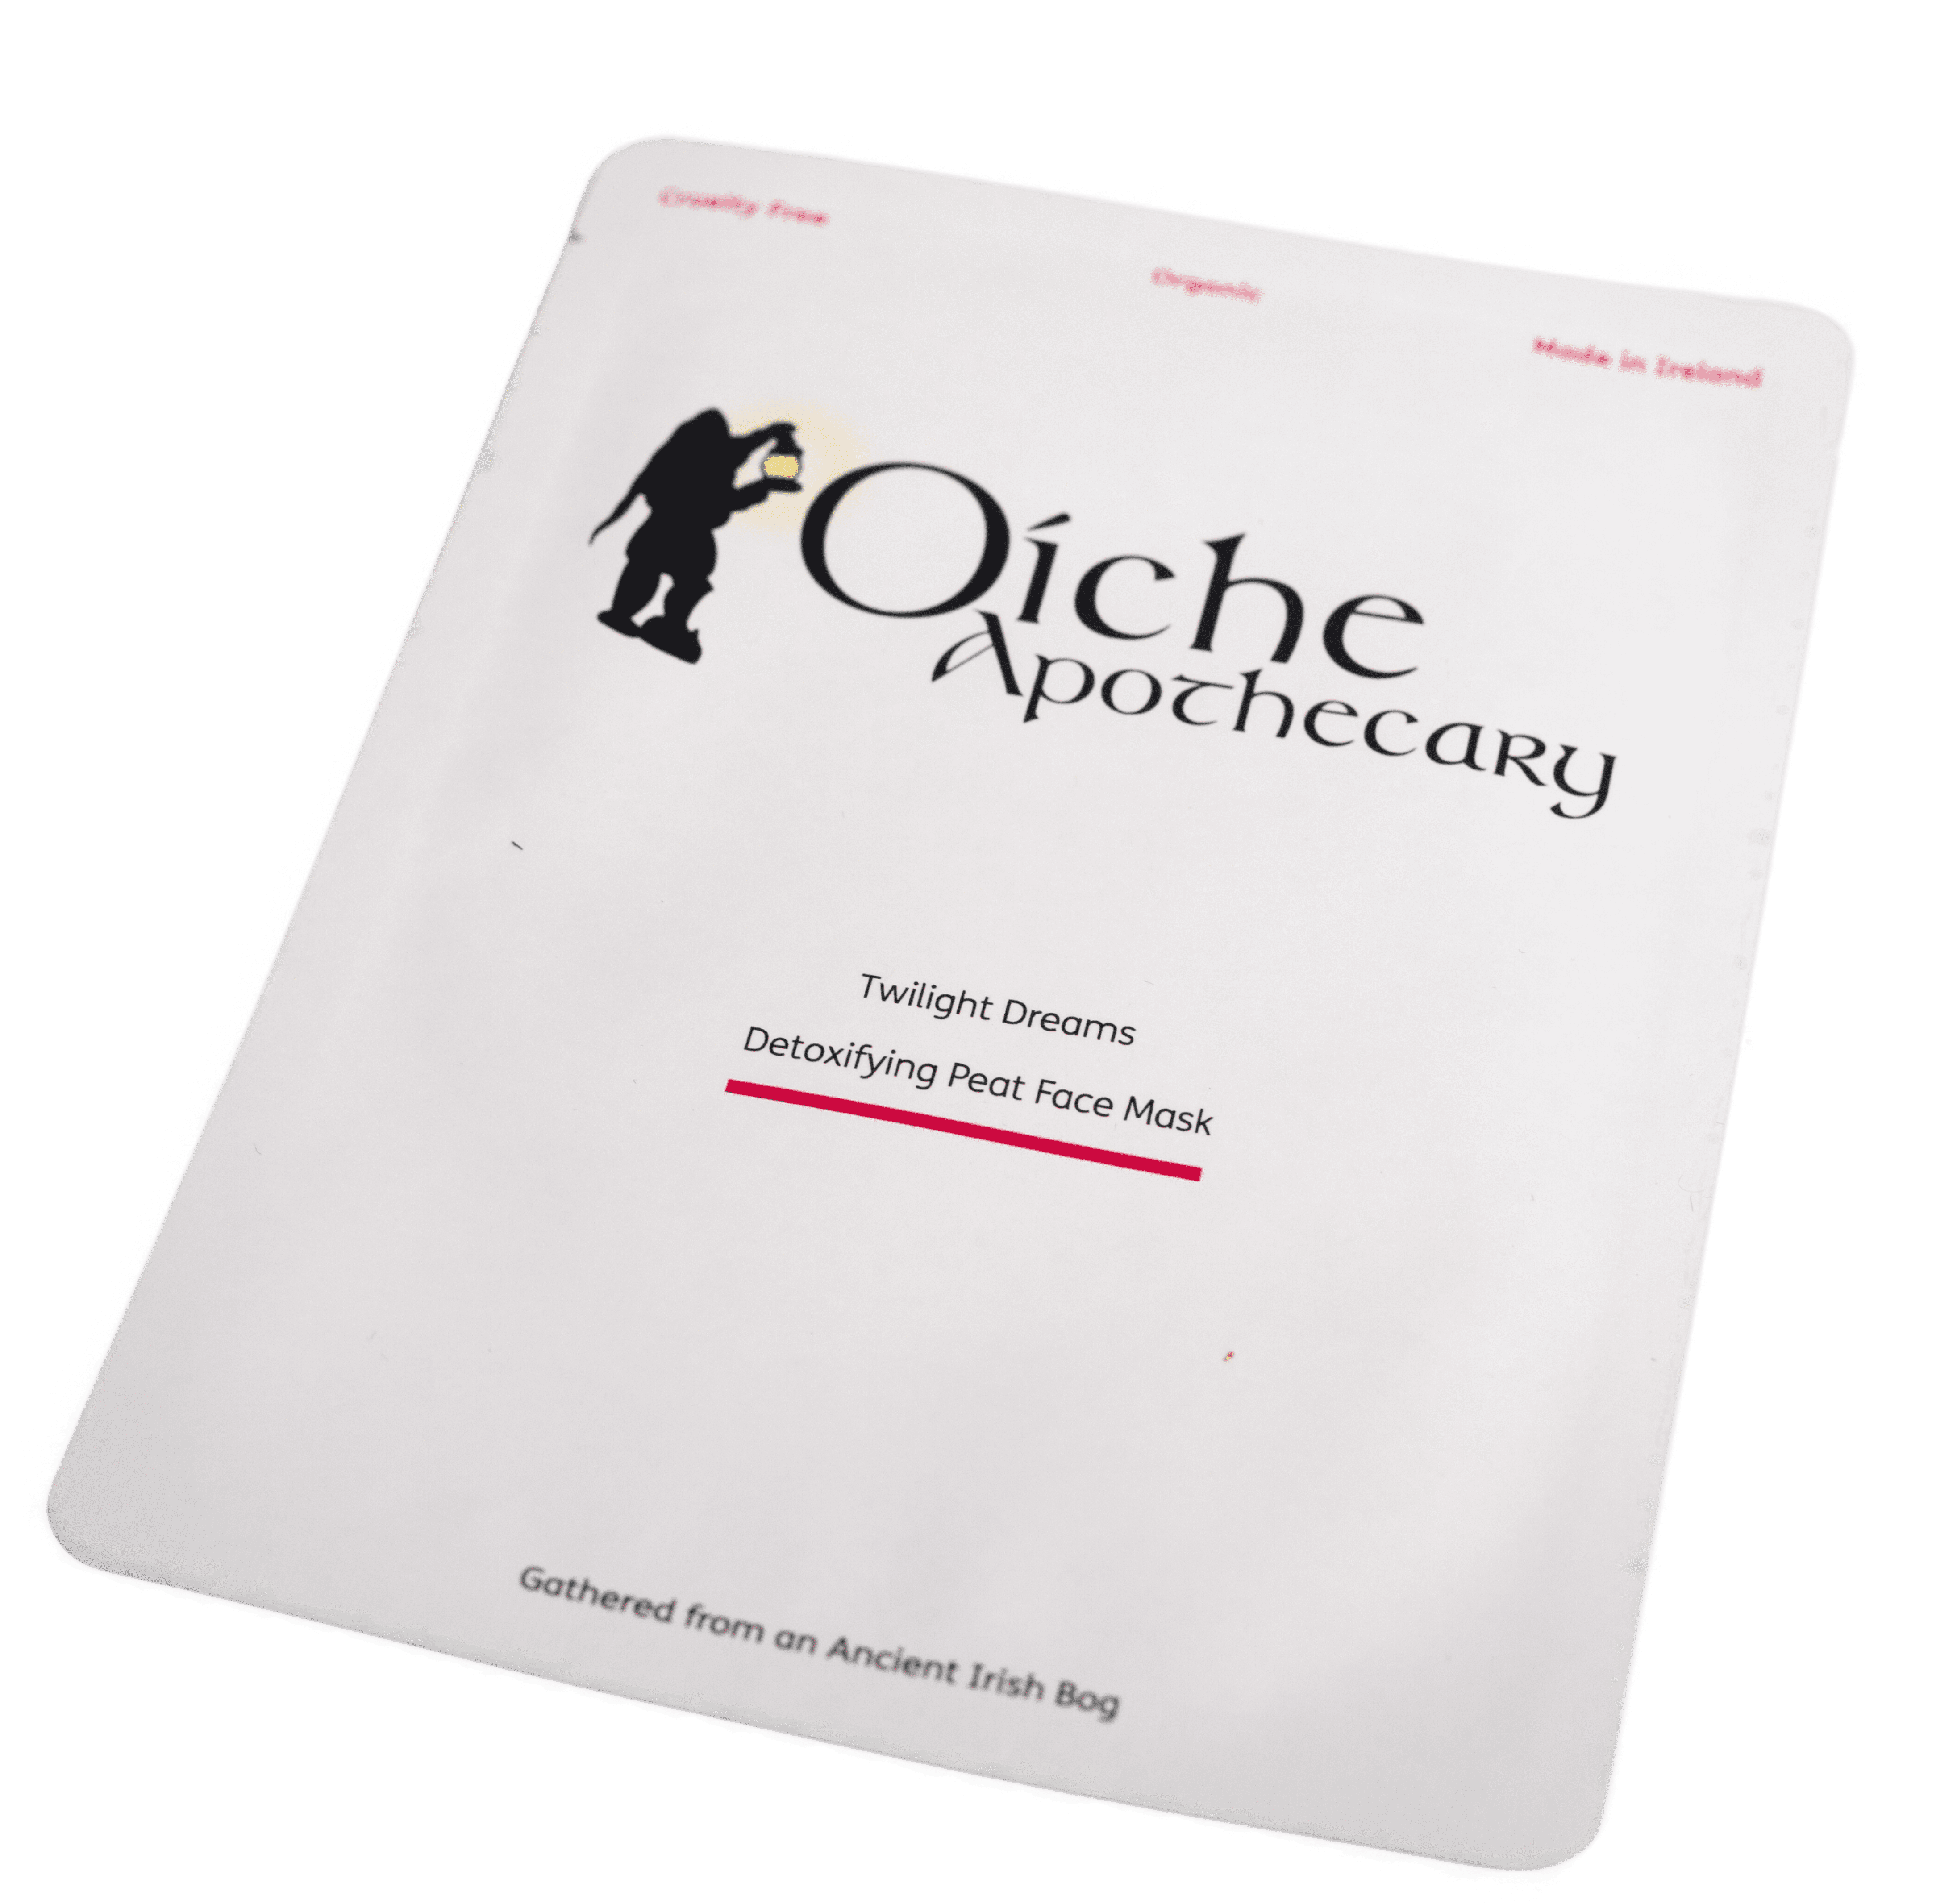 Featured product picture of the Oiche Ireland Face Mask - Twilight Dreams Sheet Mask